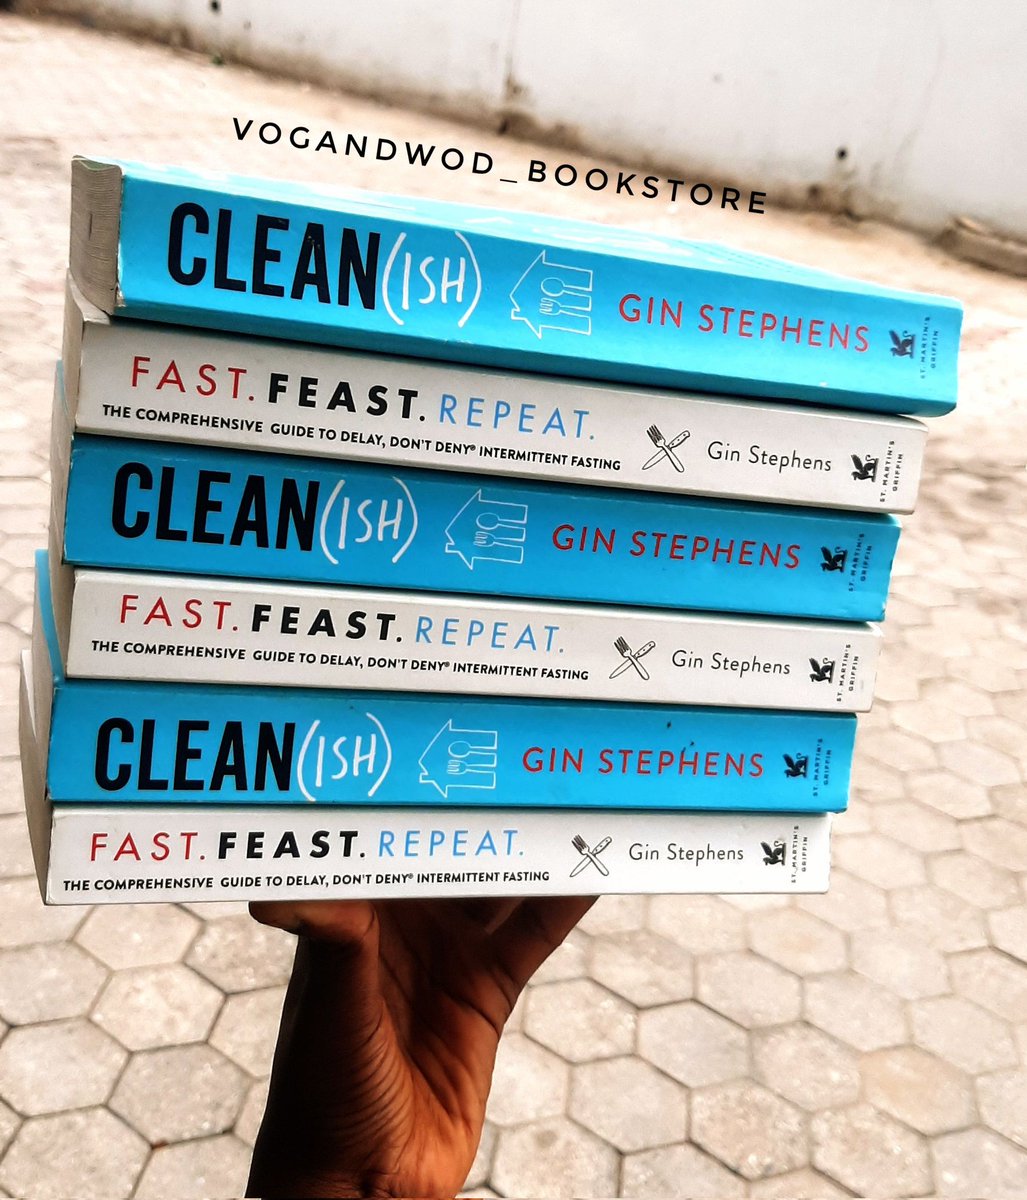 FAST. FEAST. REPEAT Change when you eat and change your body, your health, and your life! Diets don’t work. You know you know that, and yet you continue to try them, because what else can you do? You can Fast. Feast. Repeat.